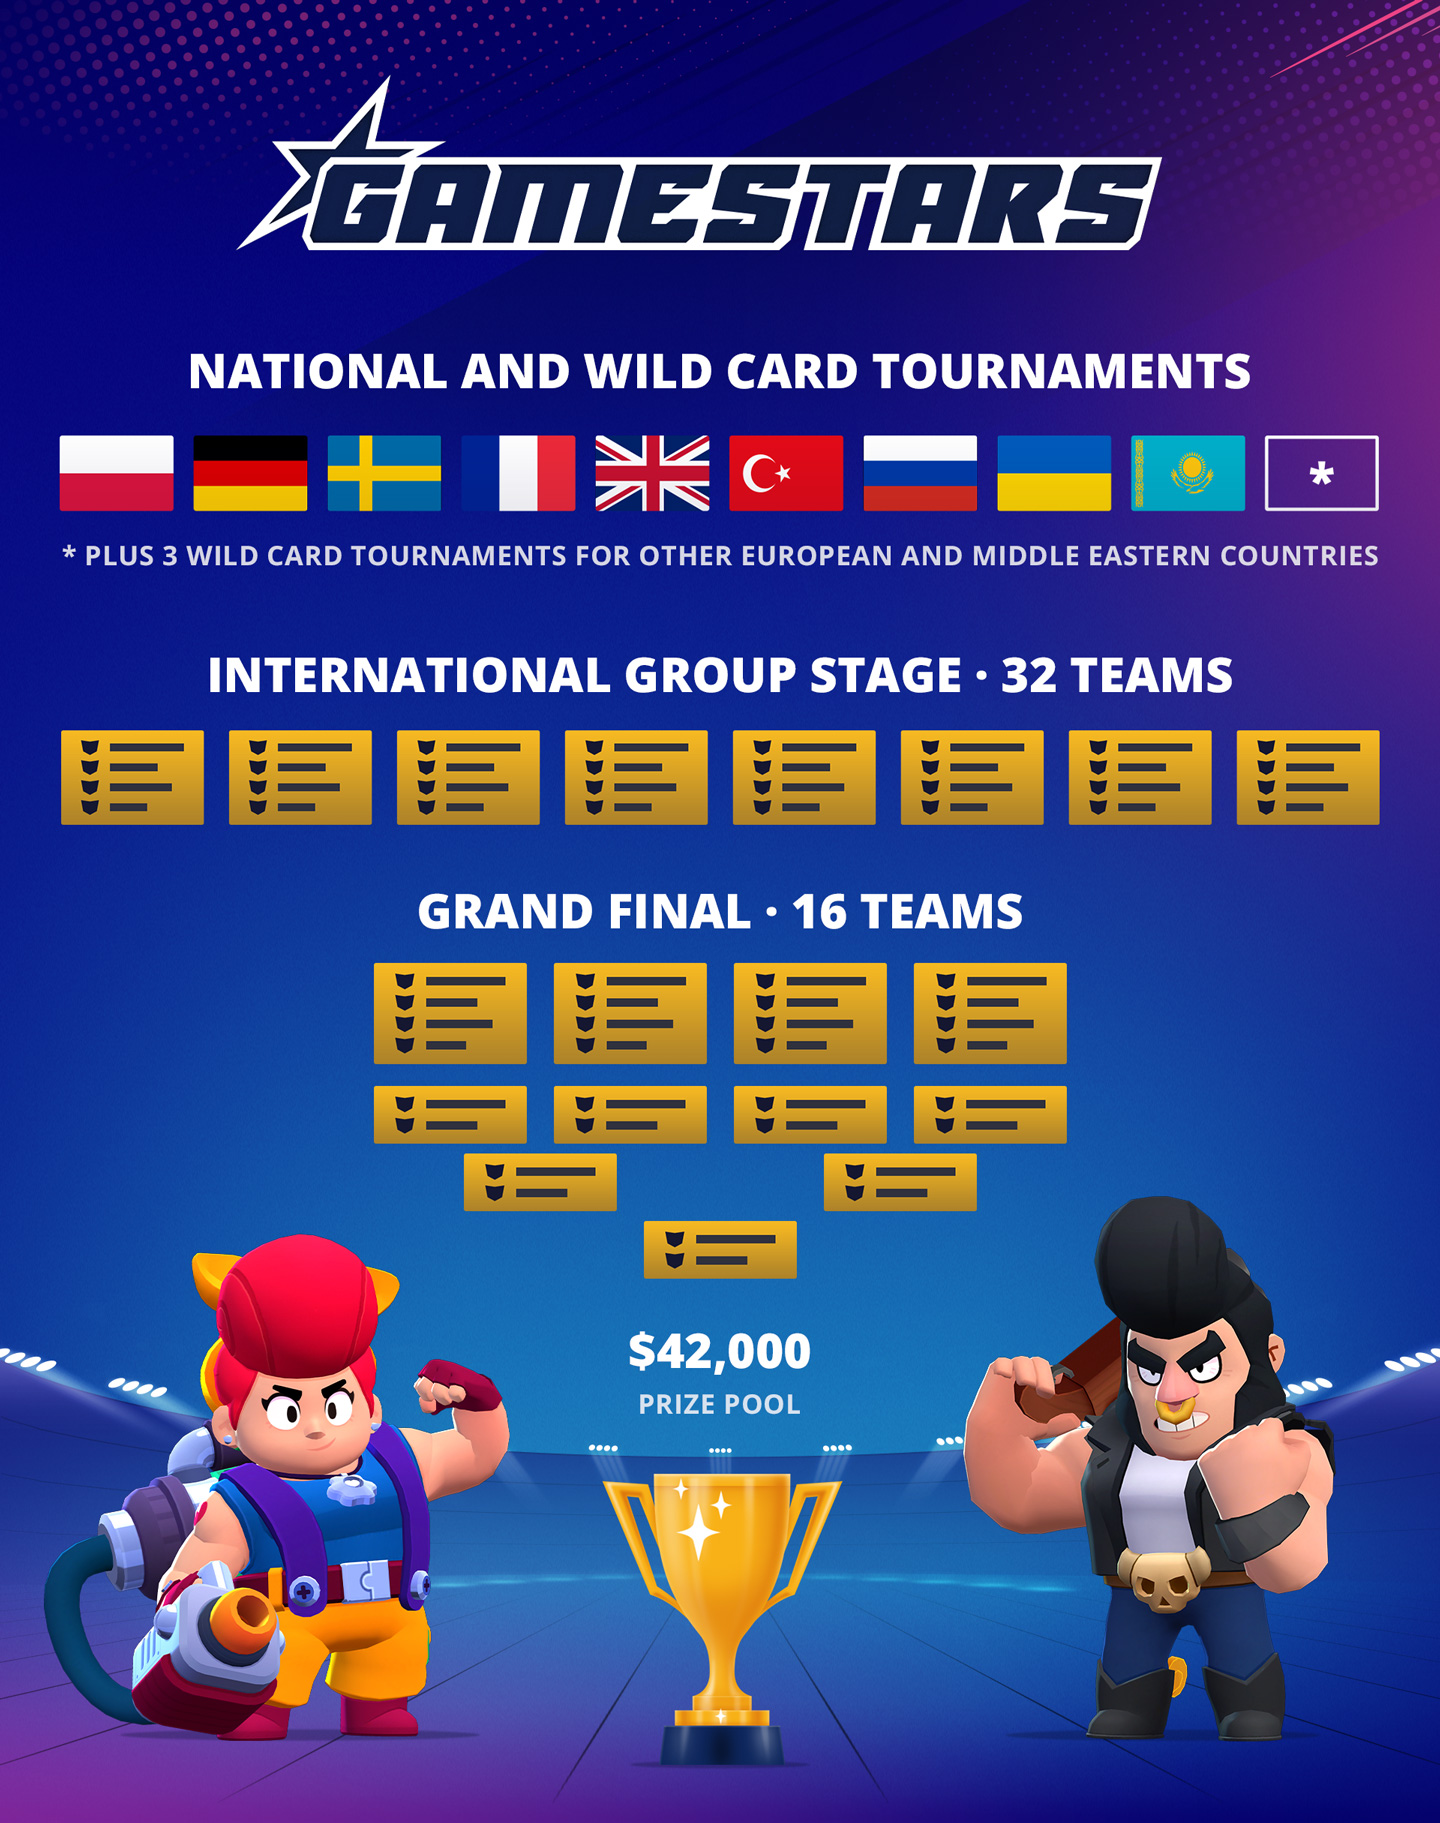 Starladder To Launch The First Season Of Brawl Stars Gamestars League For The Teams Gamestars - brawl stars release date android europe